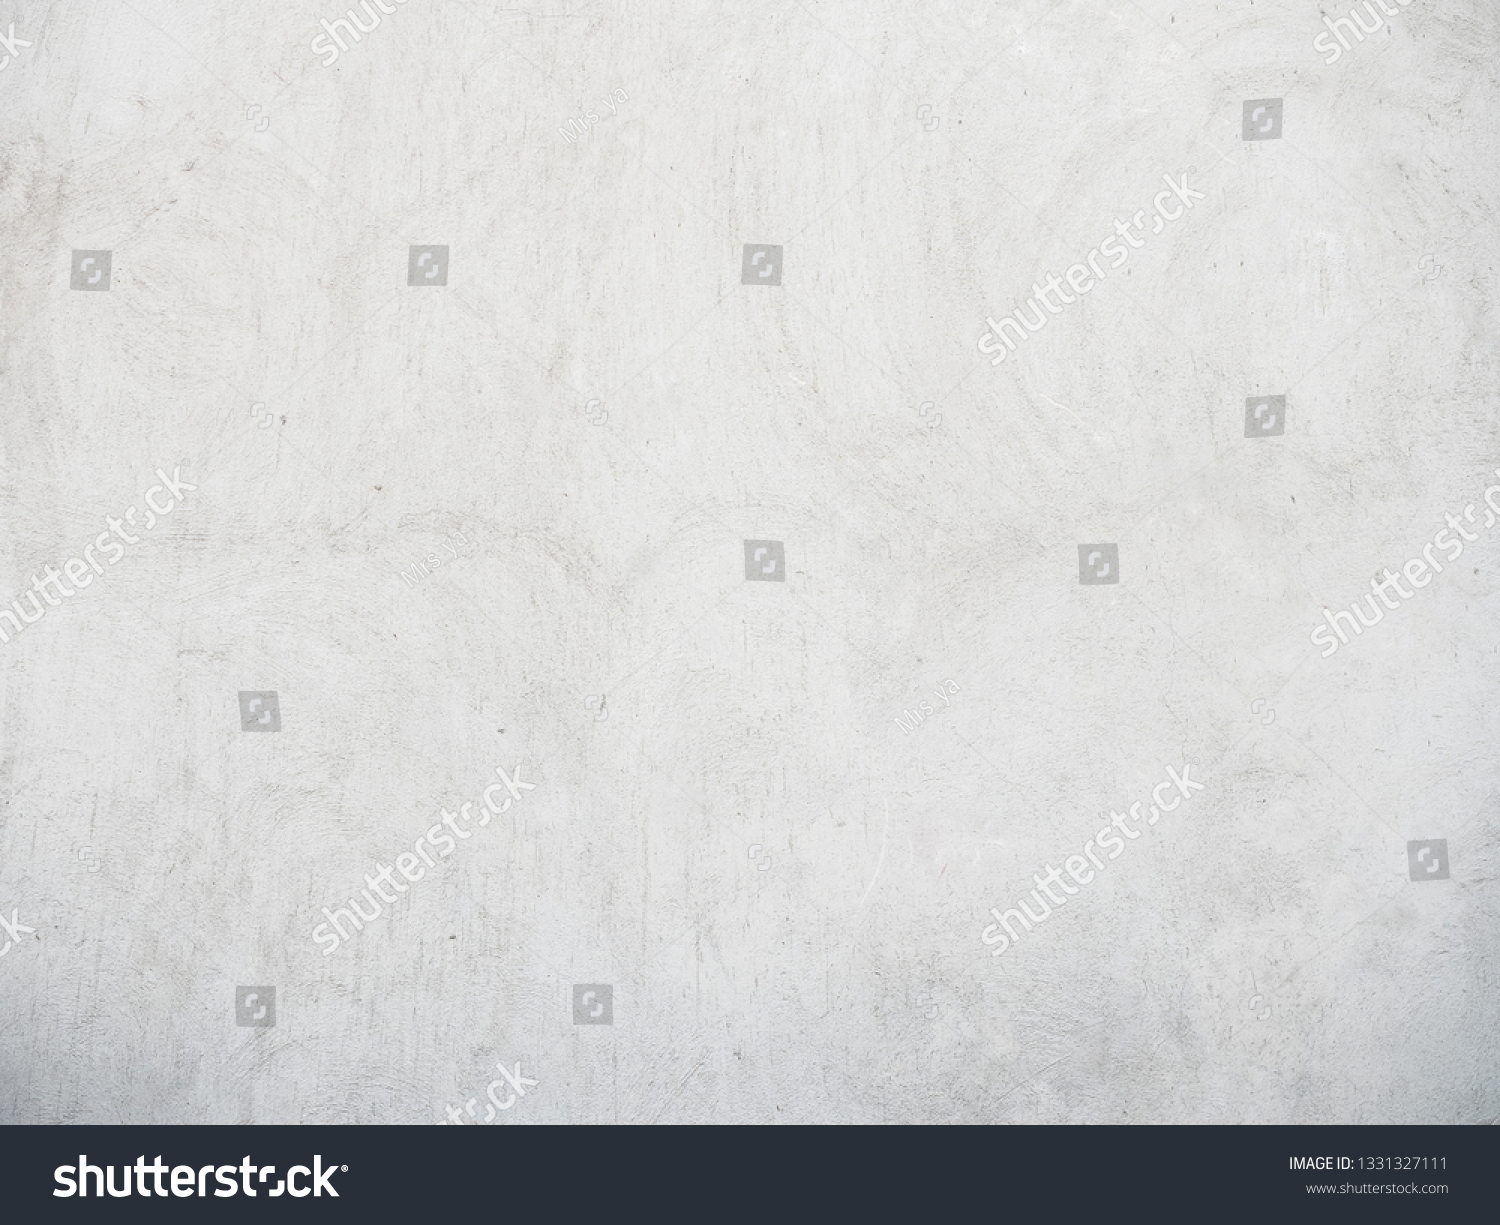 real concrete texture pattern on surface with tract of weathered scratch, concrete texture for backdrop or decoration #1331327111